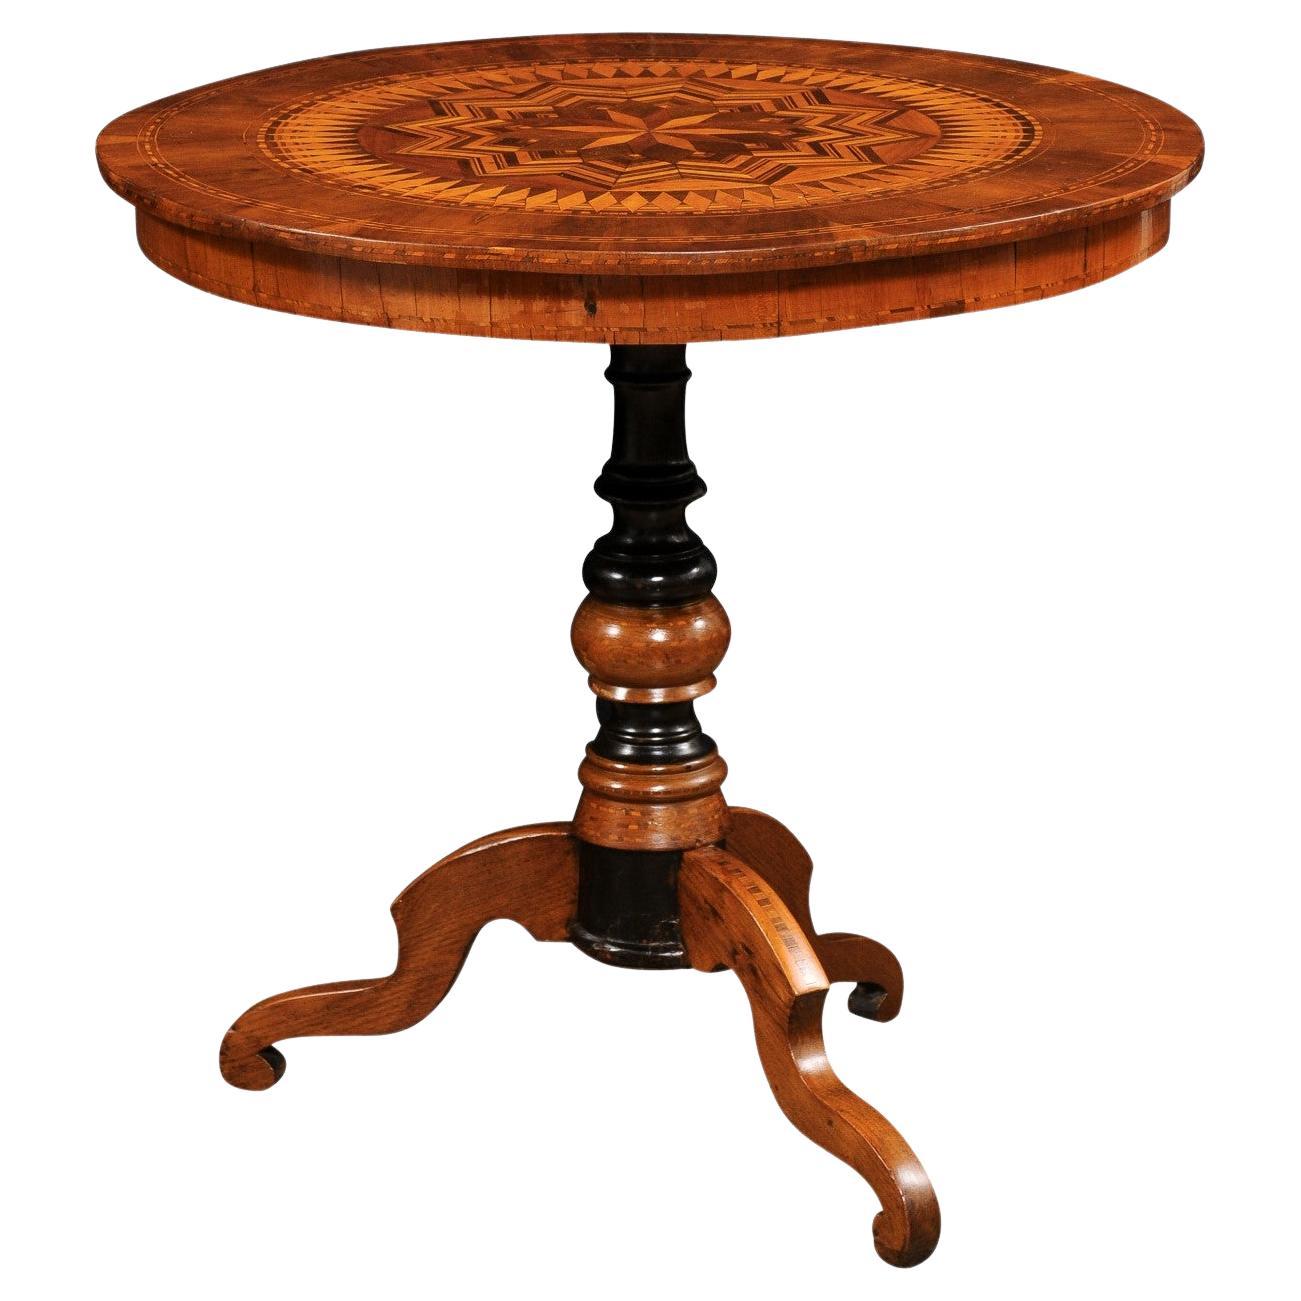 Italian 19th Century Walnut and Birch Marquetry Center Table with Tripod Base For Sale